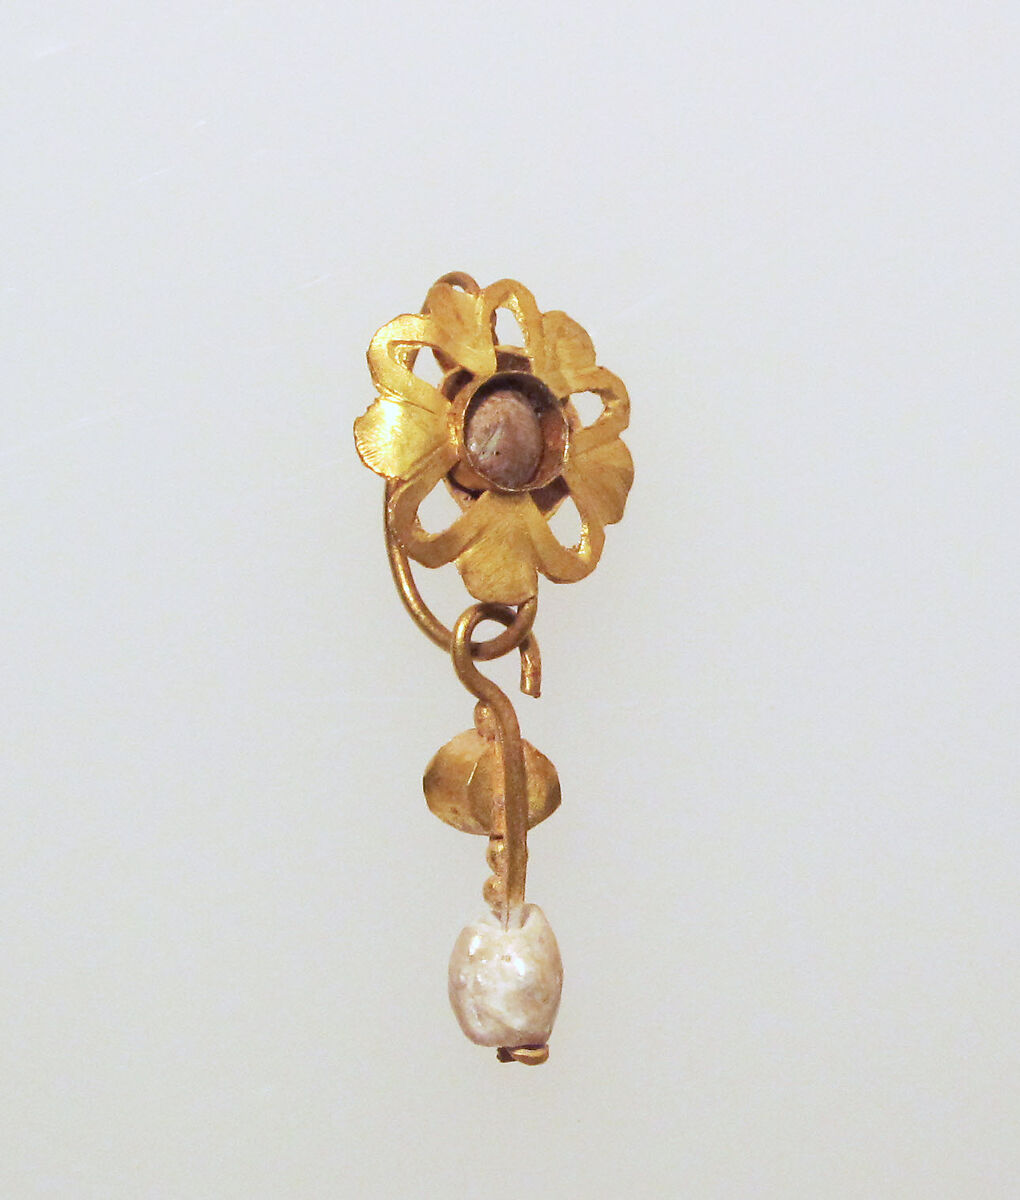 Earring with pendant and beryl and pearl settings, Gold, beryl, pearl 